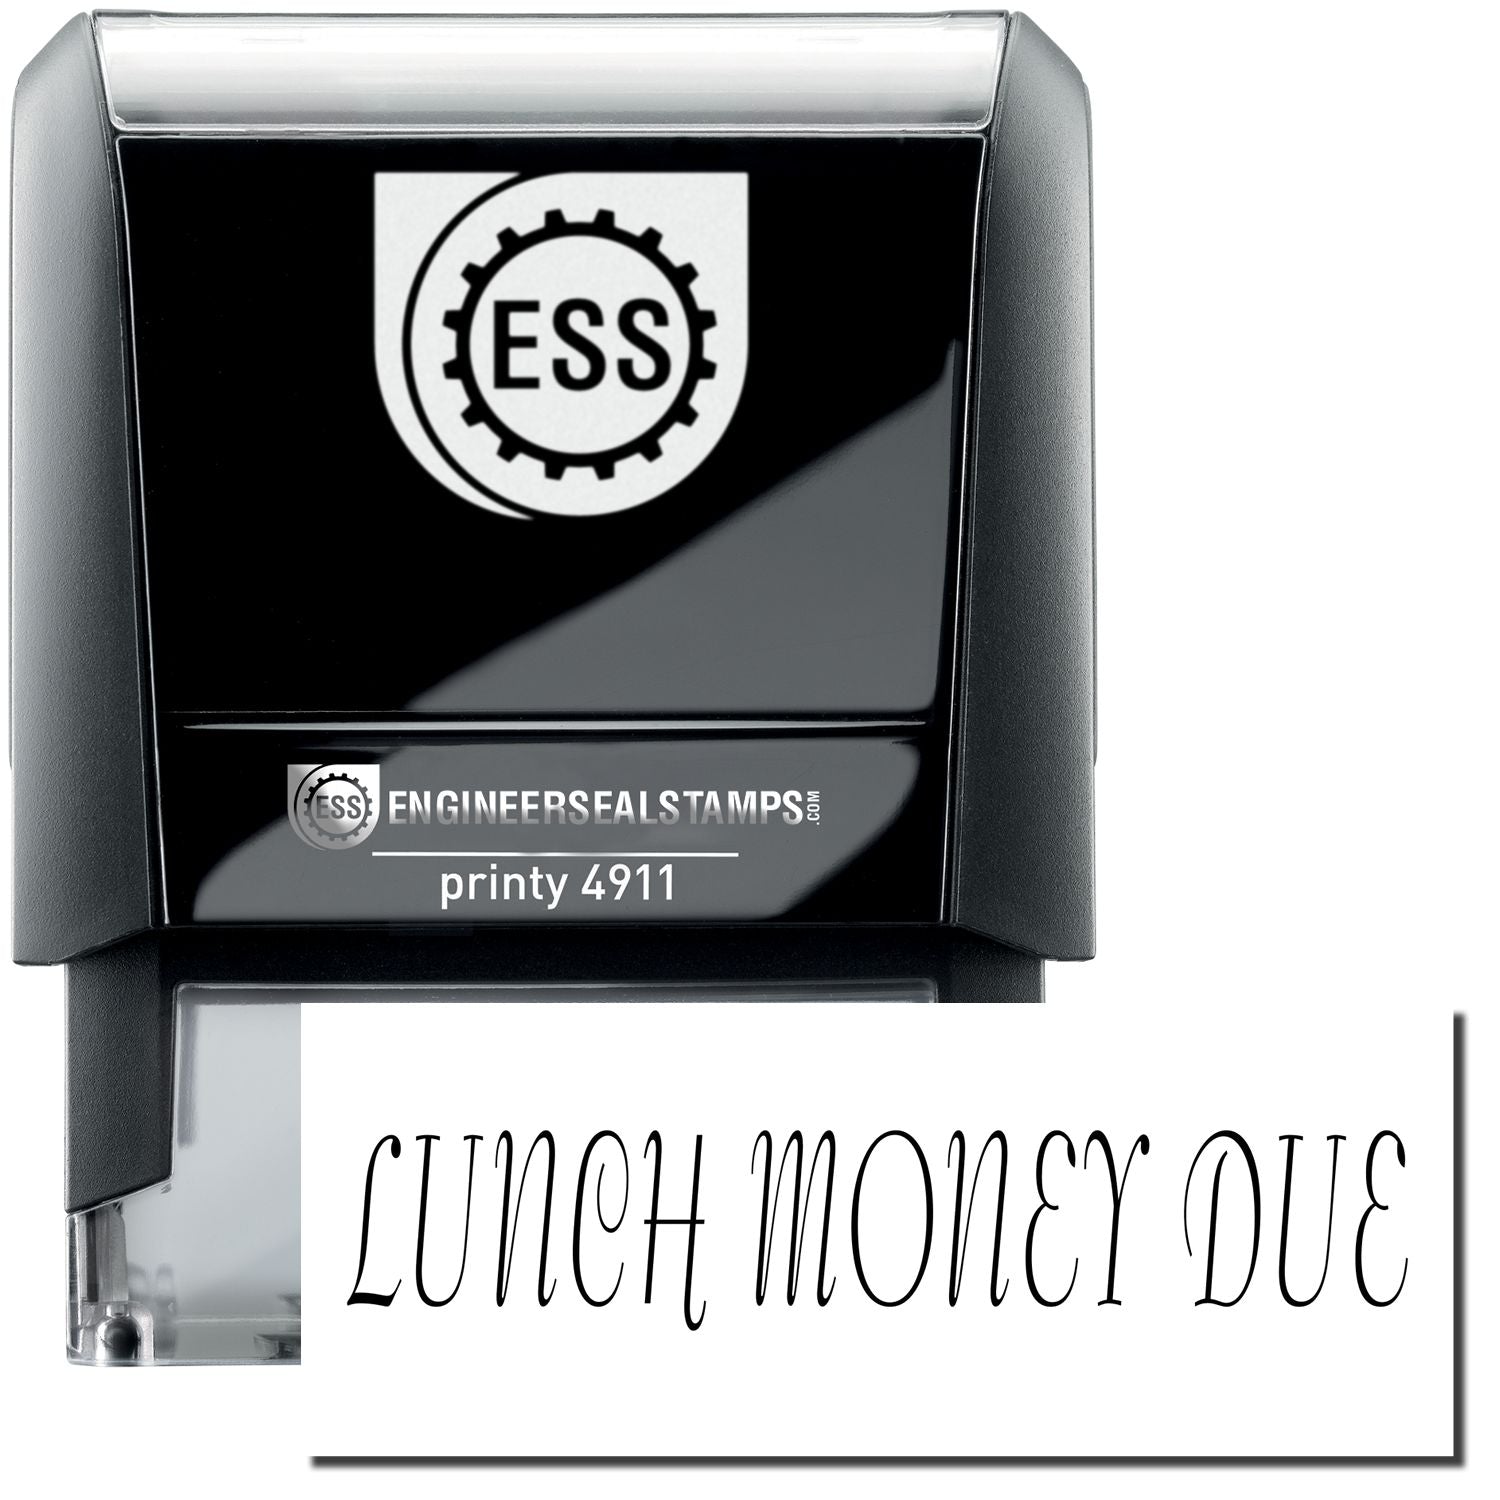 A self-inking stamp with a stamped image showing how the text "LUNCH MONEY DUE" is displayed after stamping.